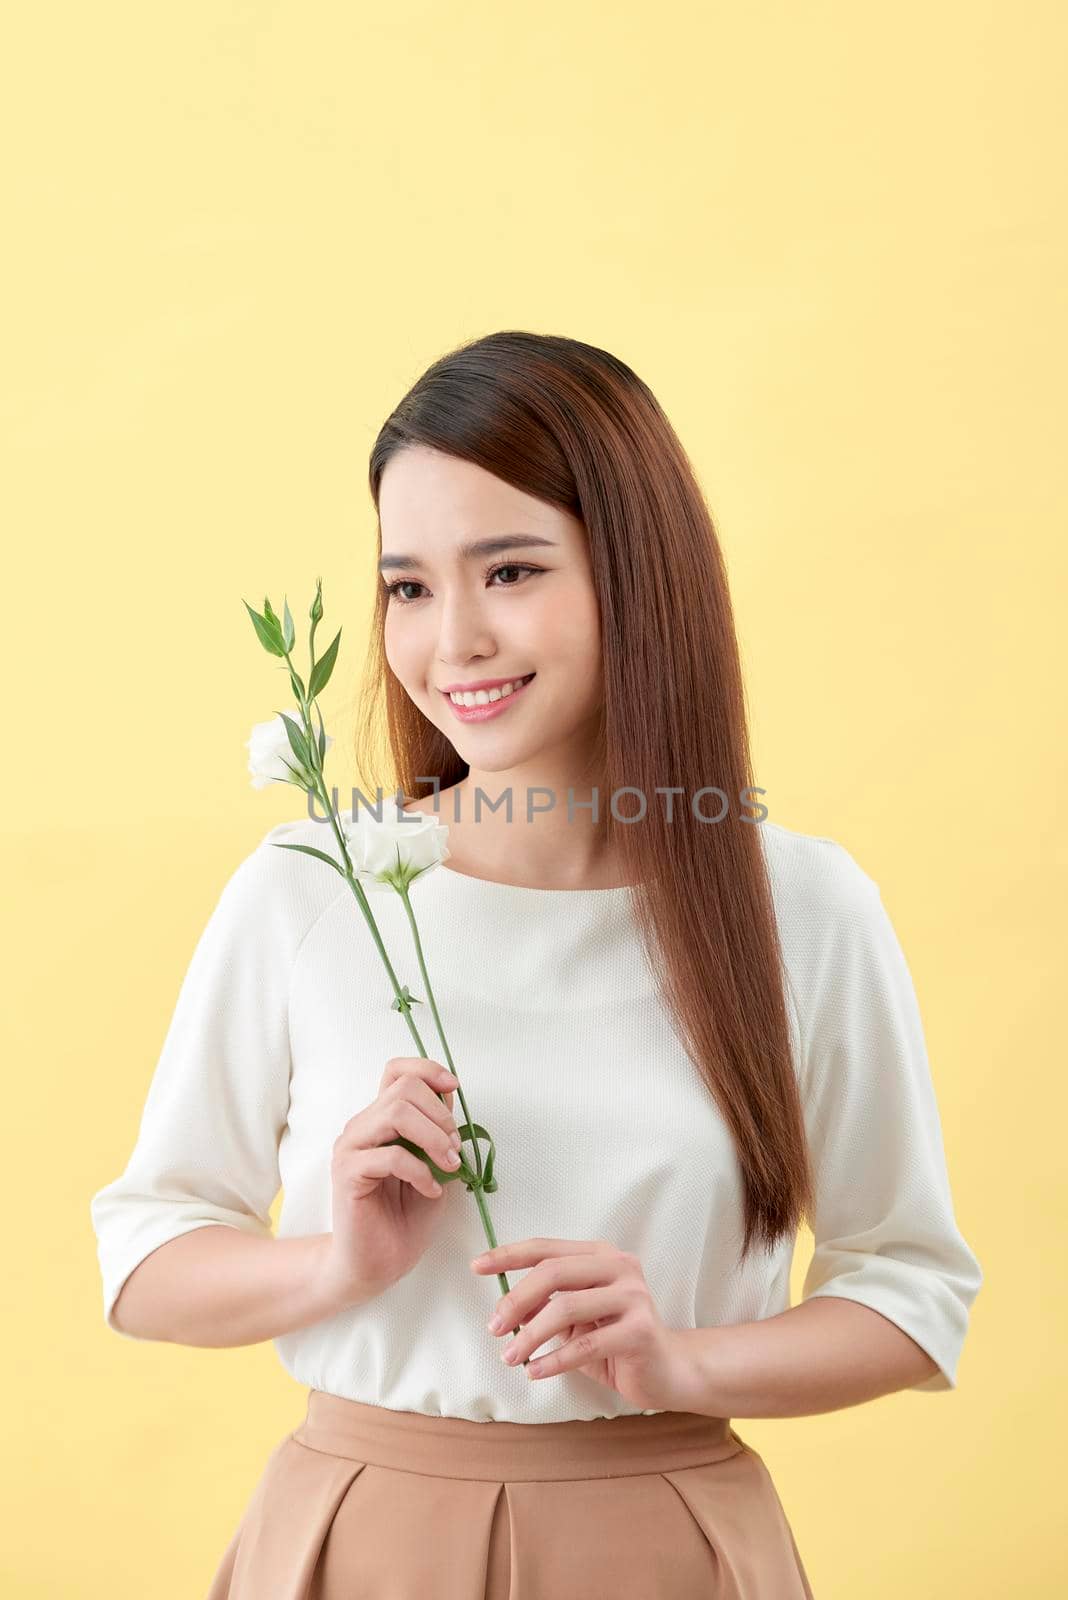 Beauty portrait of lady 20s holding white lisianthus flowers over yellow background by makidotvn